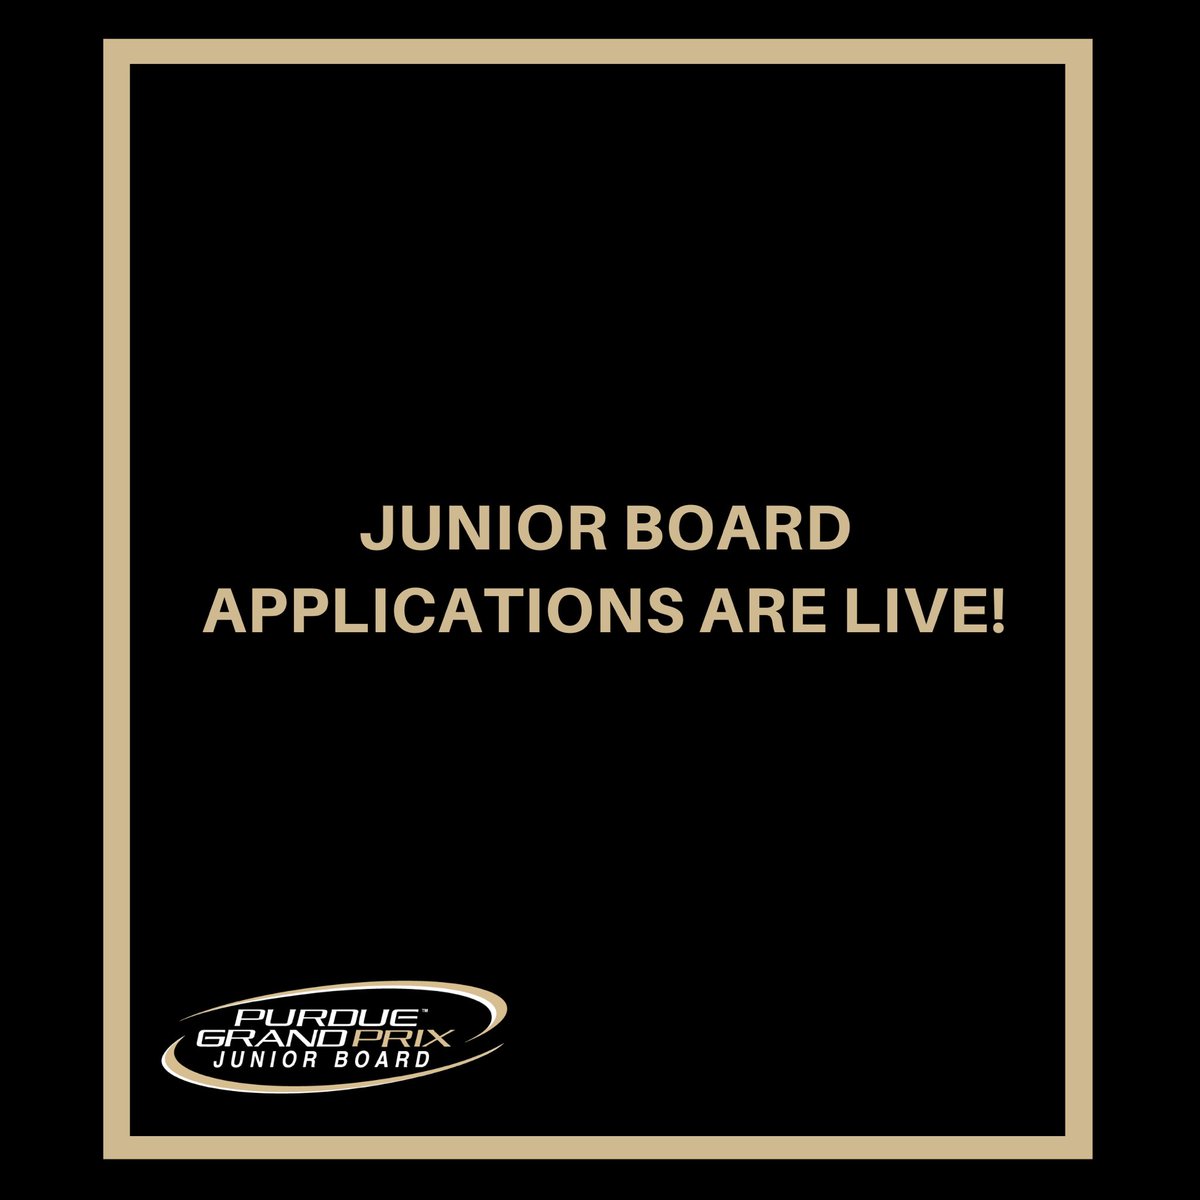 Junior Board Applications are now live! Click the link bellow to apply. Applications are due Thursday, September 17. We hope you’ll join us! boilerlink.purdue.edu/submitter/form…